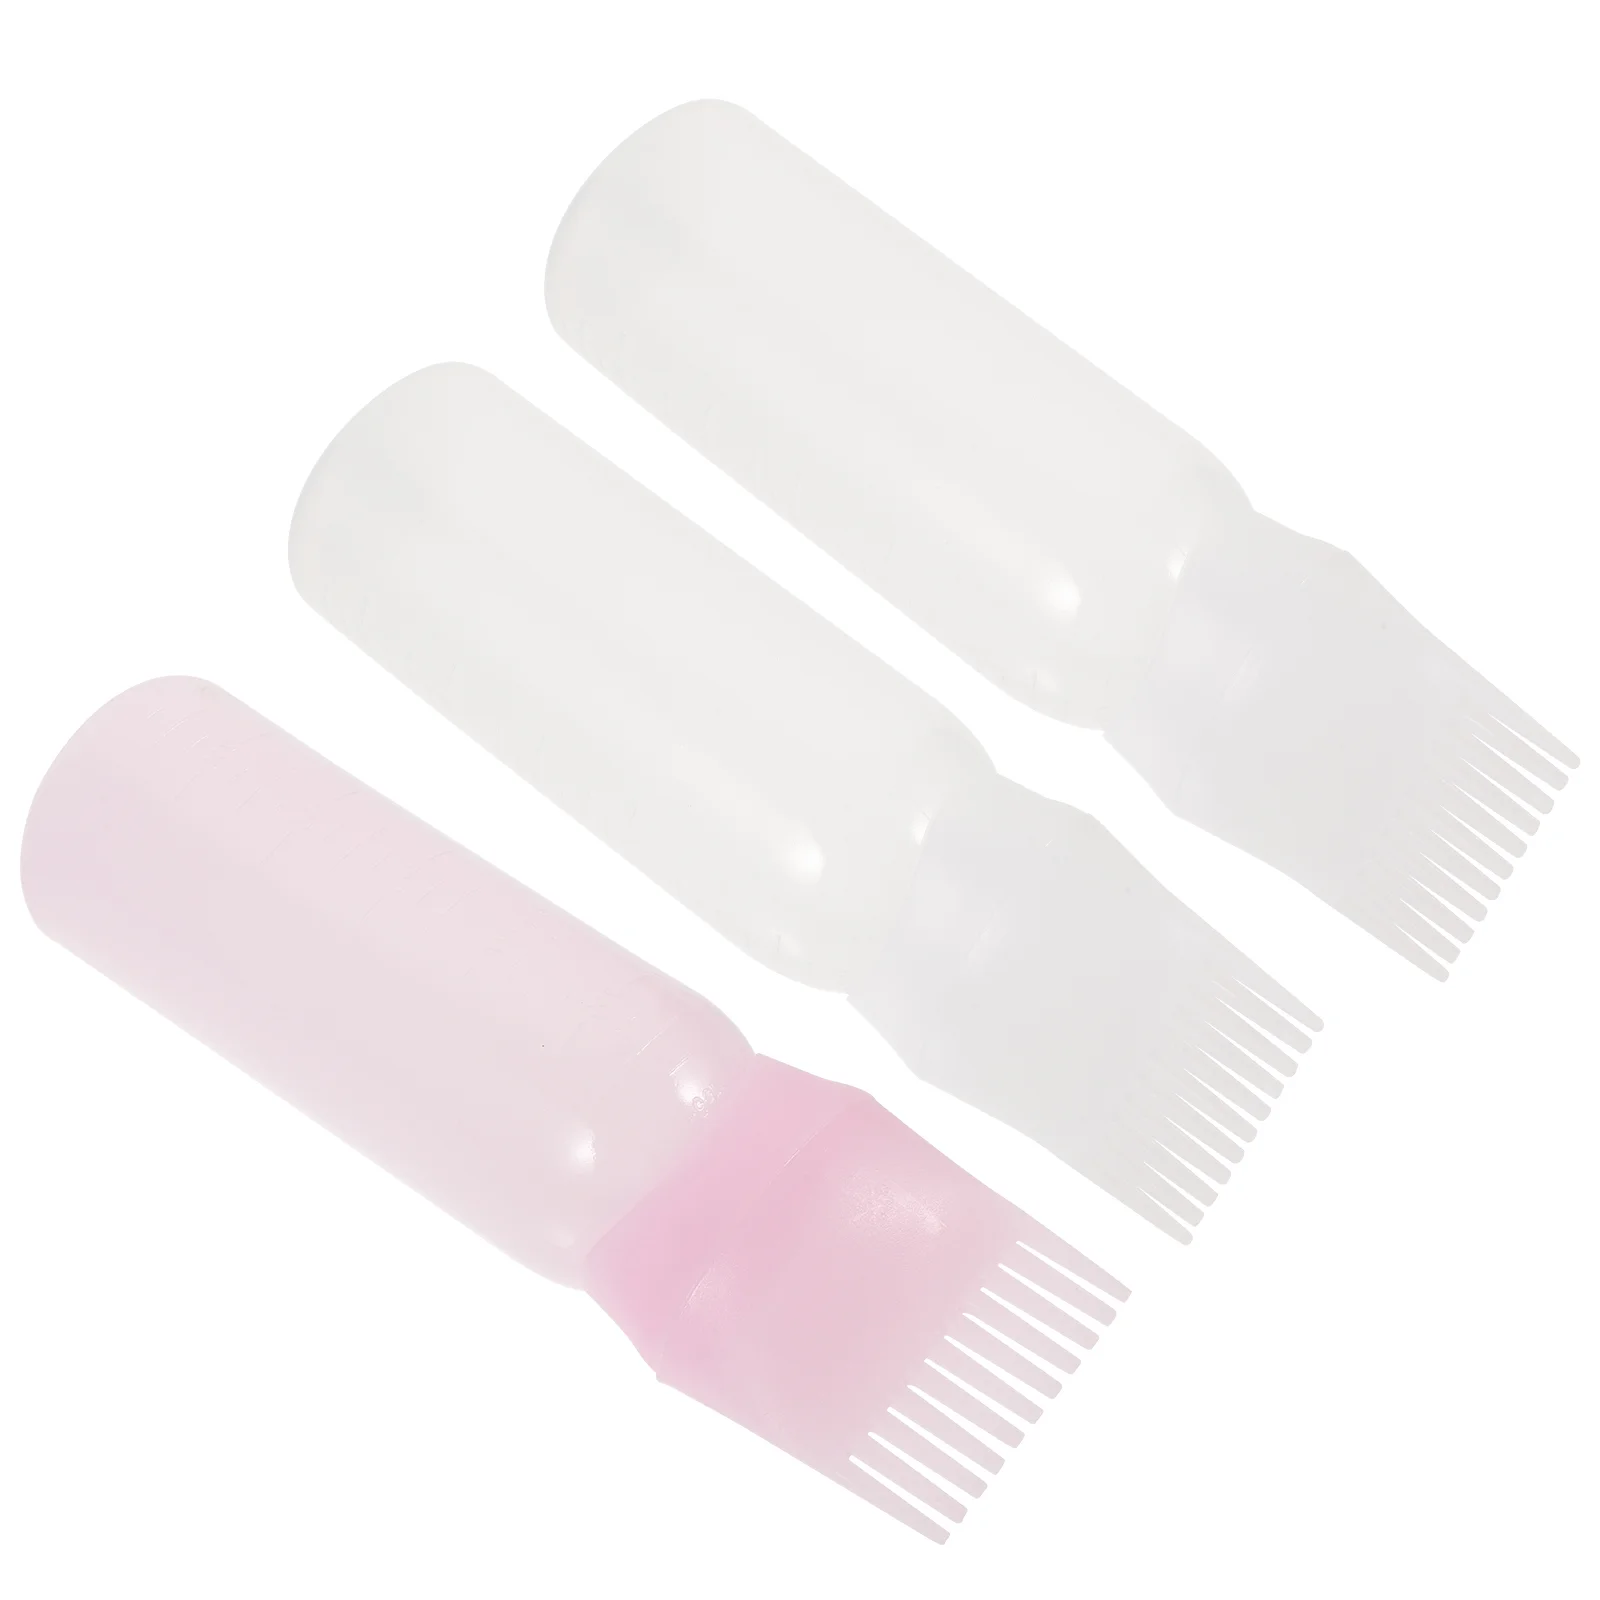 

Root Comb Applicator Bottle, 3Pcs 4oz Hair Dye Squeeze Applicator Bottles with Graduated Scale for Salon Hair Coloring Dyeing